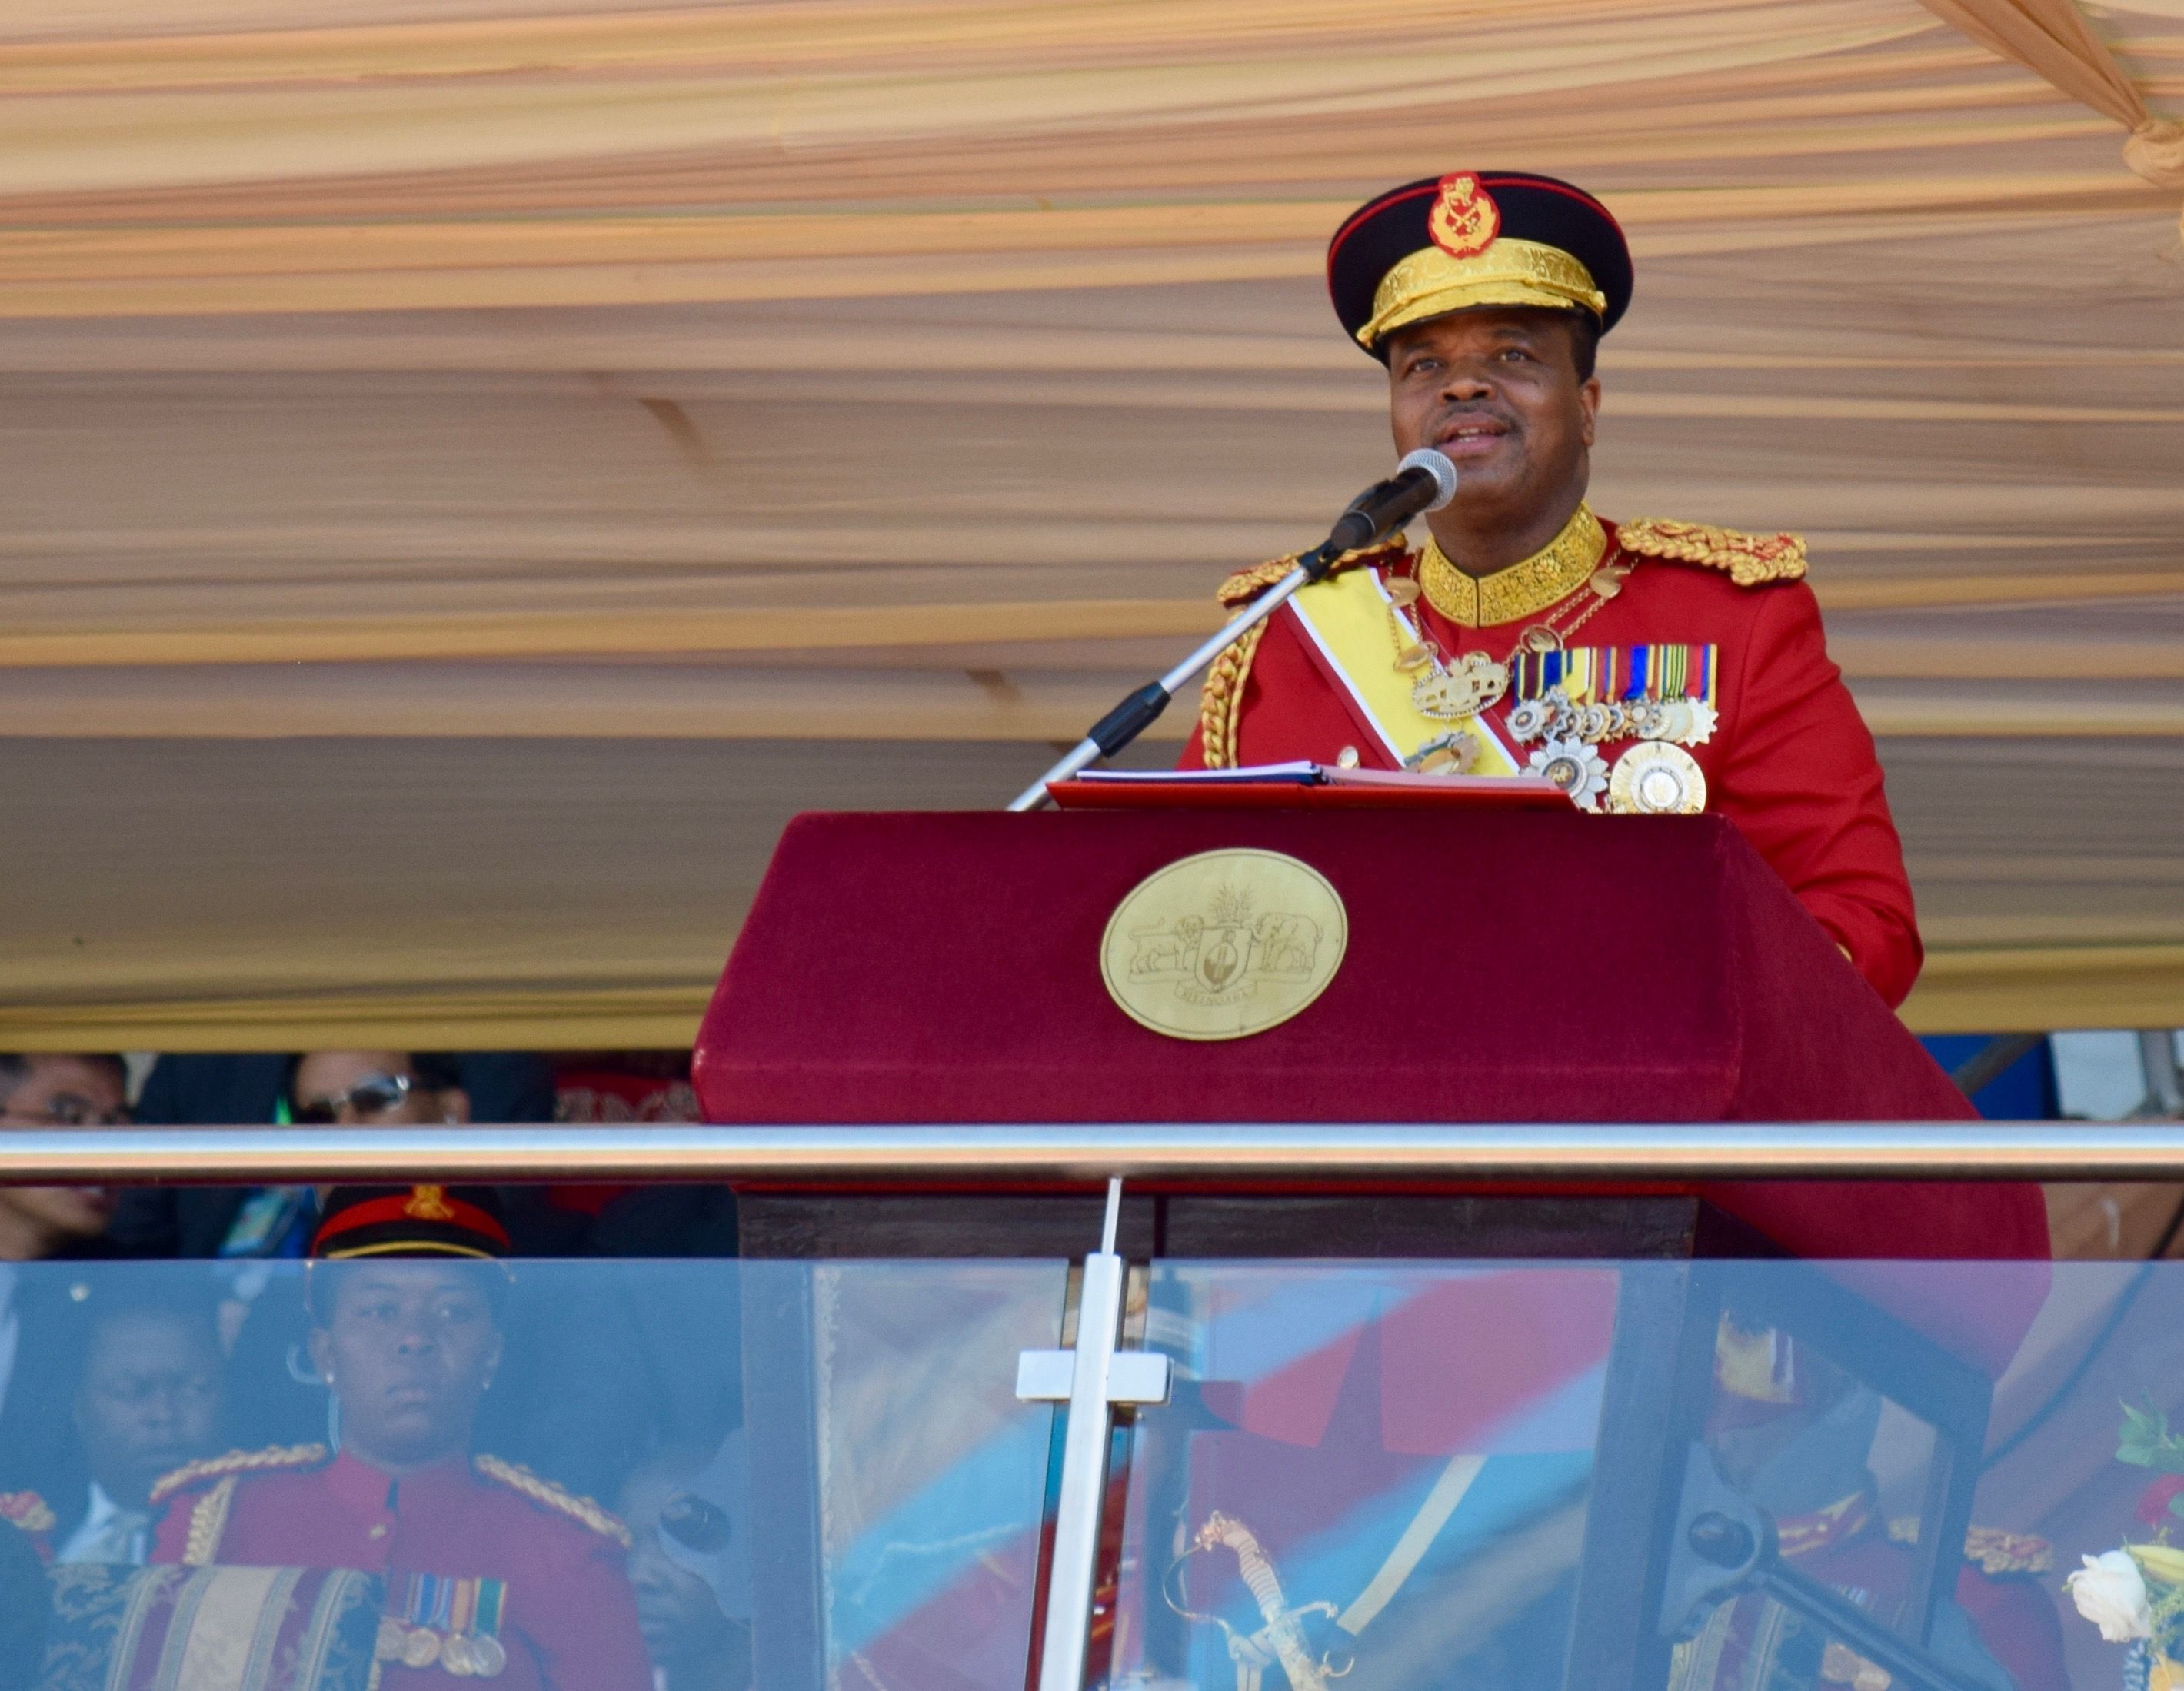 King Mswati III announcing that he will change Swaziland's name to the Kingdom of eSwatini